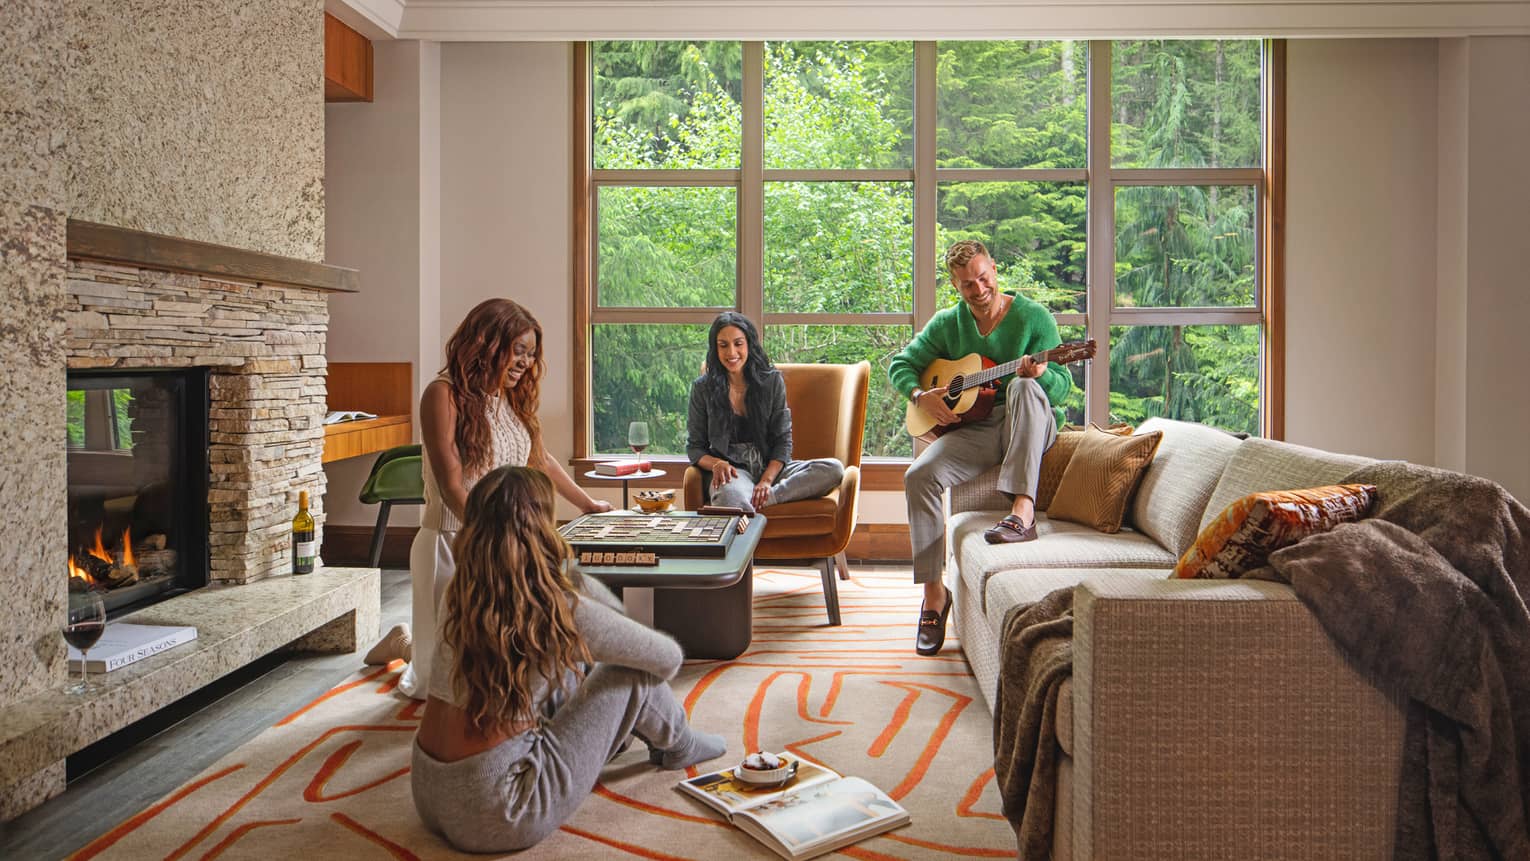 Cozy gathering in a luxury vacation rental living area at Four Seasons Whistler. Four people enjoy leisure time together; one man plays guitar while seated on a chair, and three women engage in conversation and board games. The room is warmly decorated with a stone fireplace, large windows showcasing a forest view, a plush sofa, and vibrant geometric-patterned rugs.,Cozy gathering in a luxury vacation rental living area at Four Seasons Whistler. Four people enjoy leisure time together; one man plays guitar while seated on a chair, and three women engage in conversation and board games. The room is warmly decorated with a stone fireplace, large windows showcasing a forest view, a plush sofa, and vibrant geometric-patterned rugs.